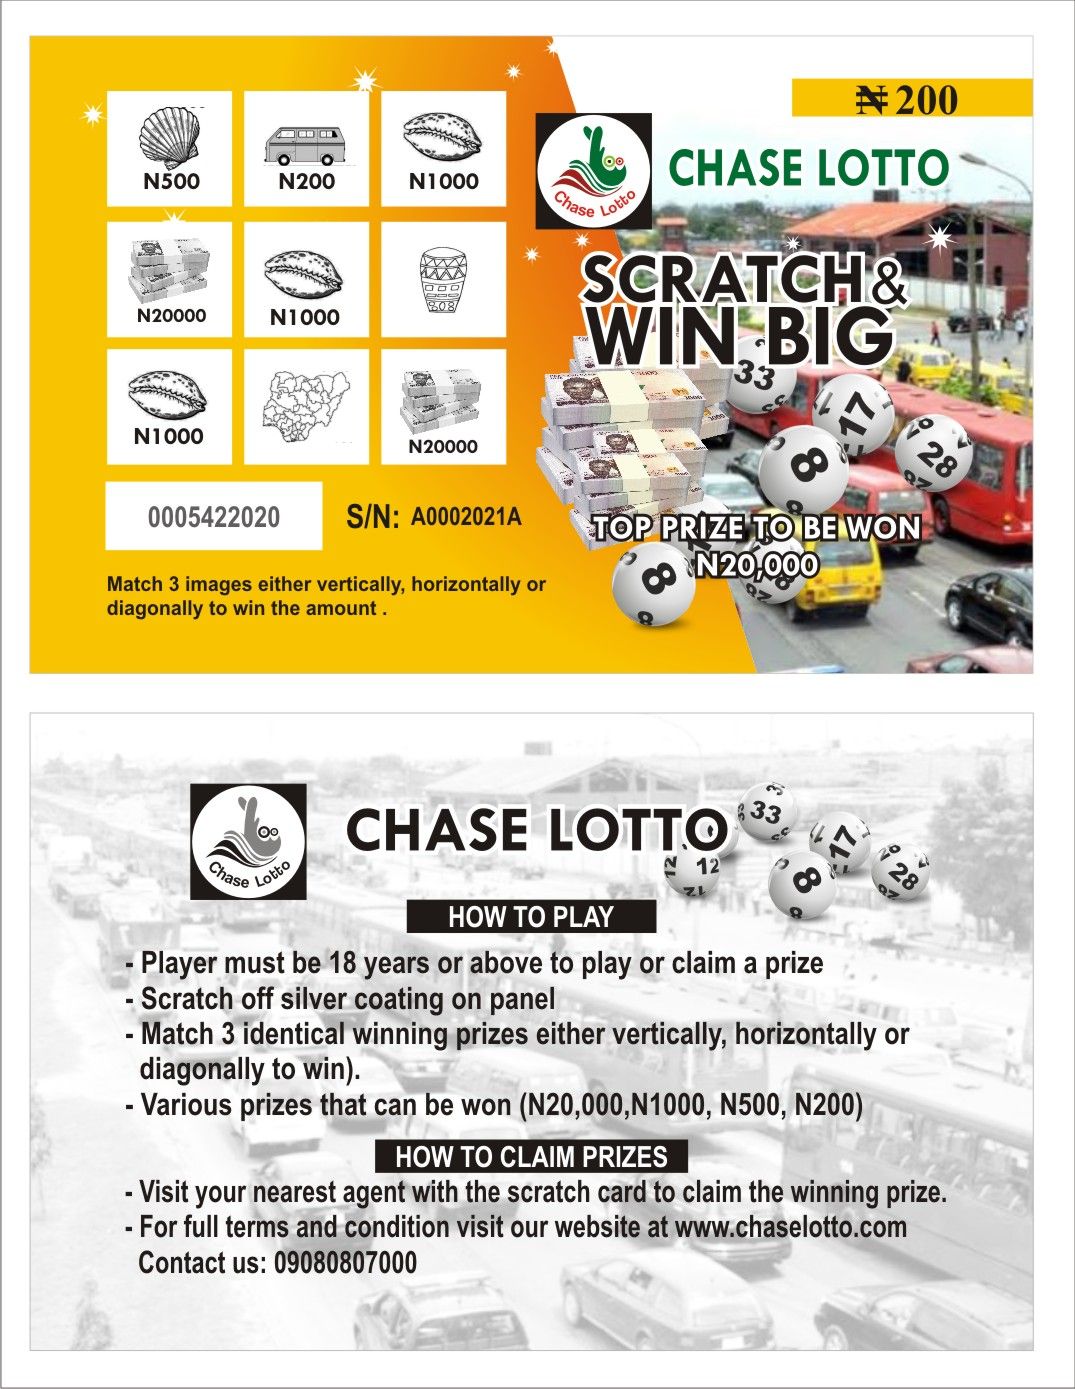 CALL BUKOLA ON 09099355873 TO PRINT YOUR LOTTERY CARDS